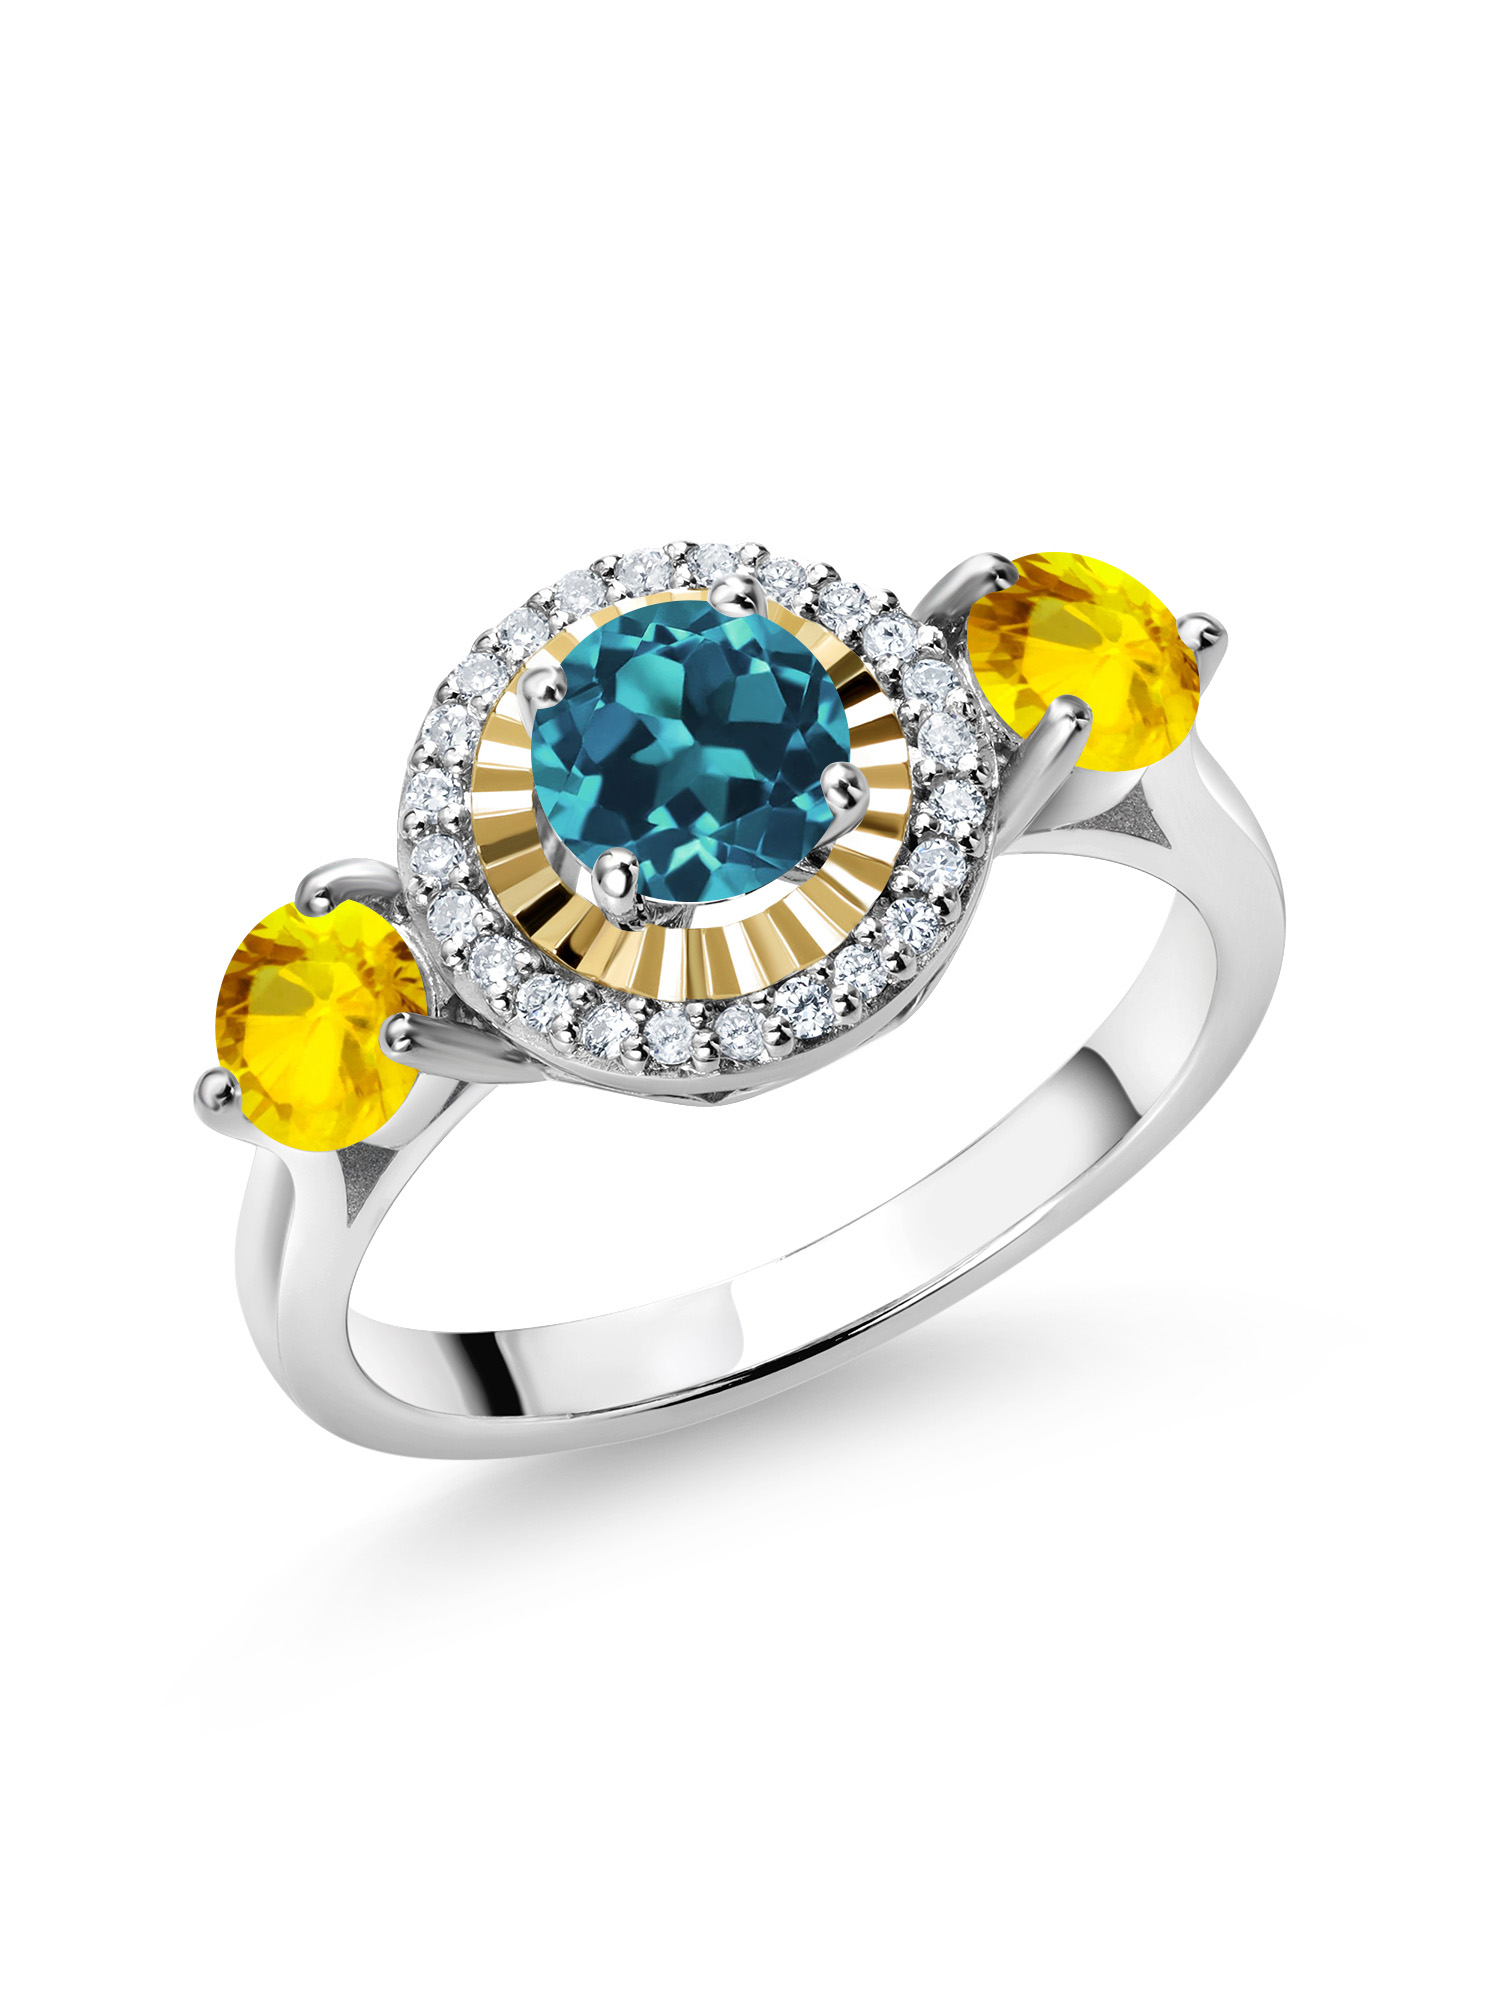 Gem Stone King 1.54 Ct London Blue Topaz Yellow Sapphire 925 Silver and ...